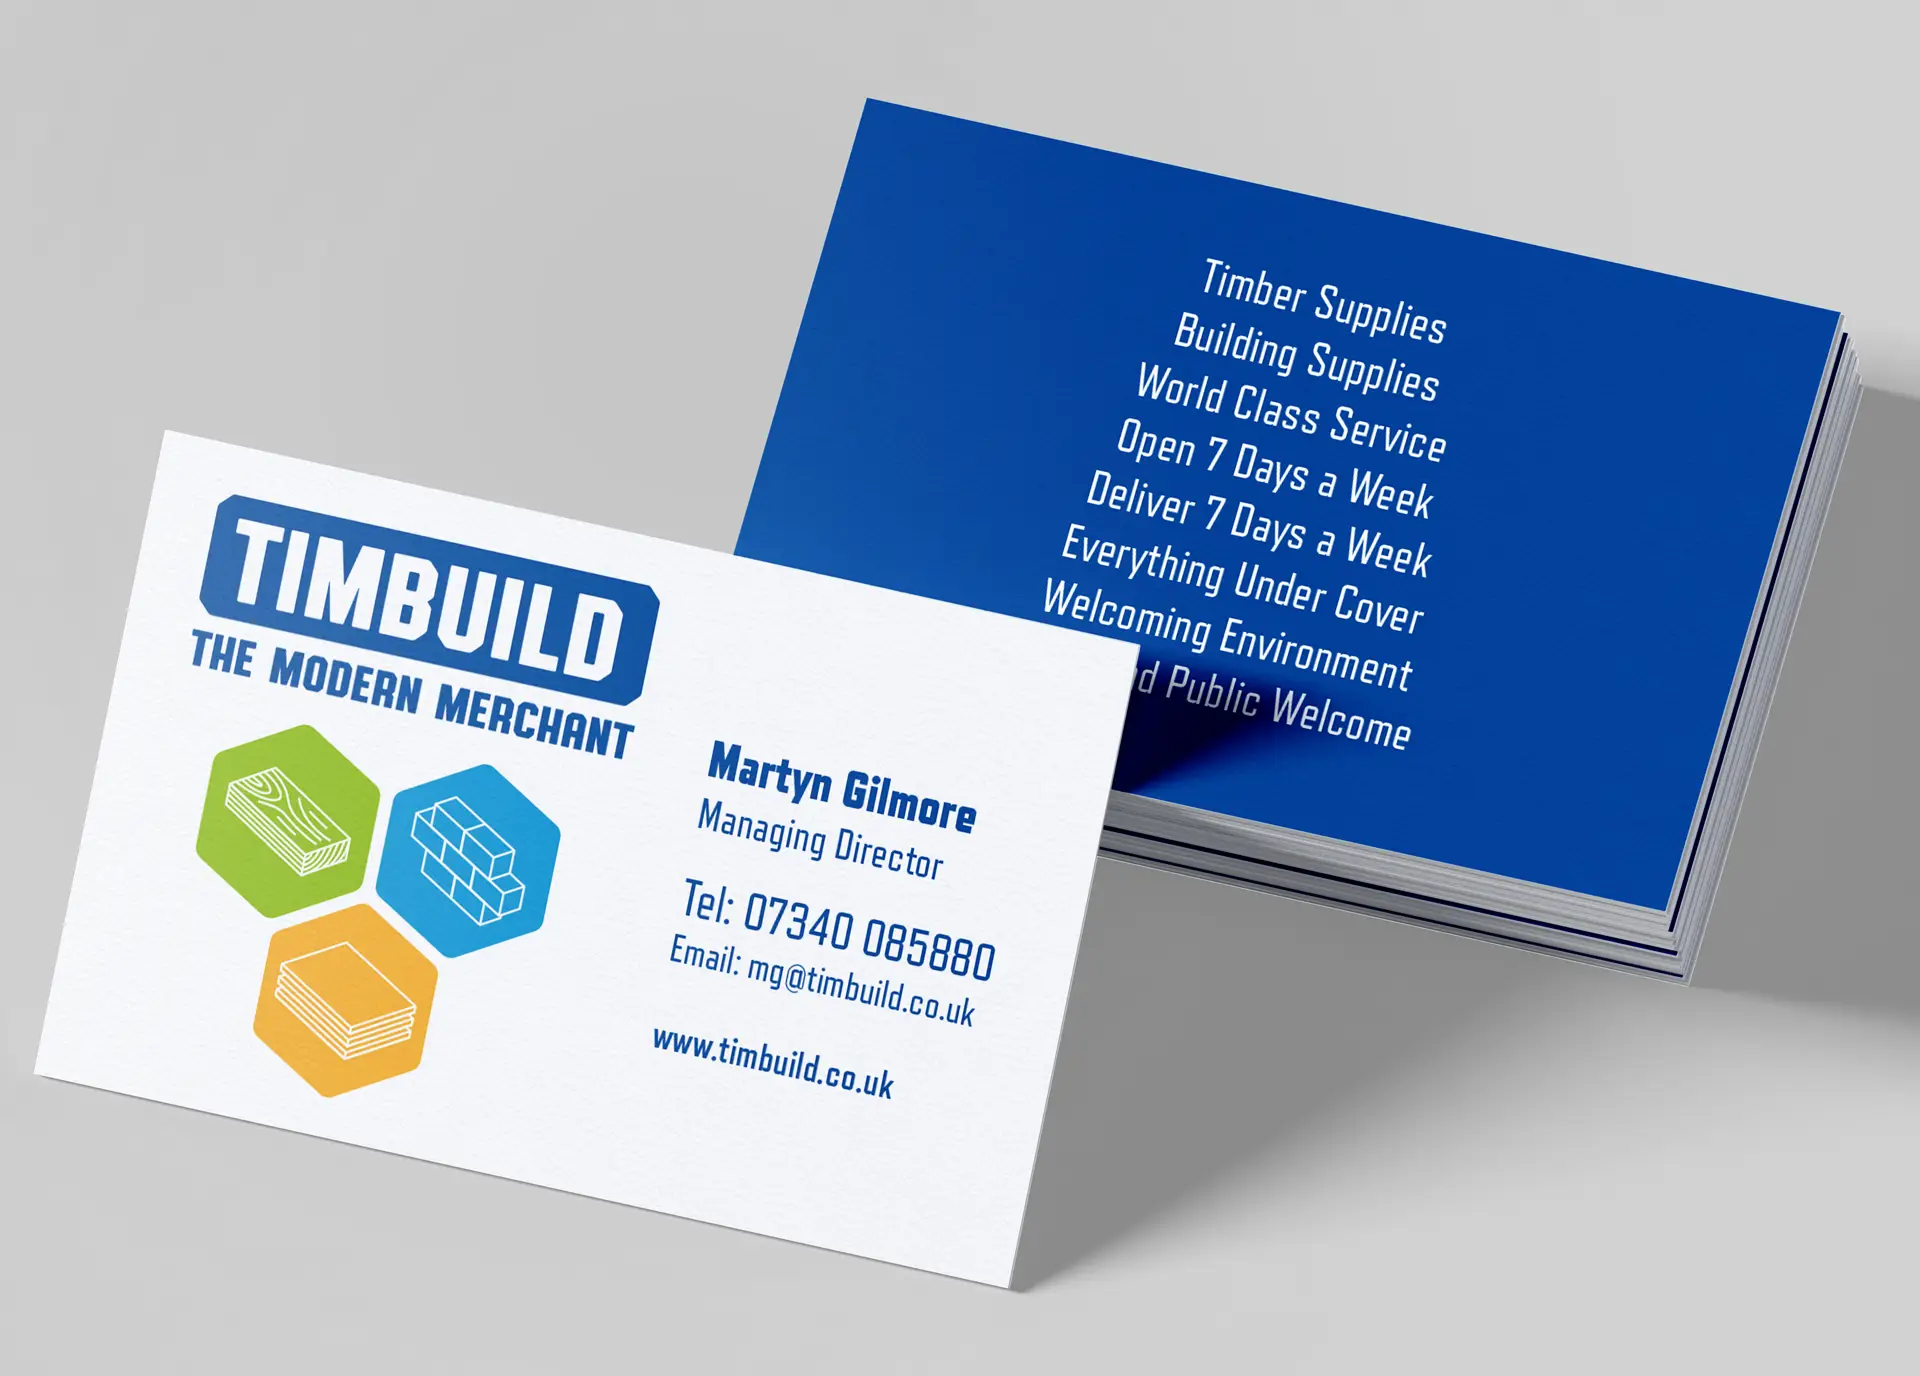 Timbuild logo on double sided business card